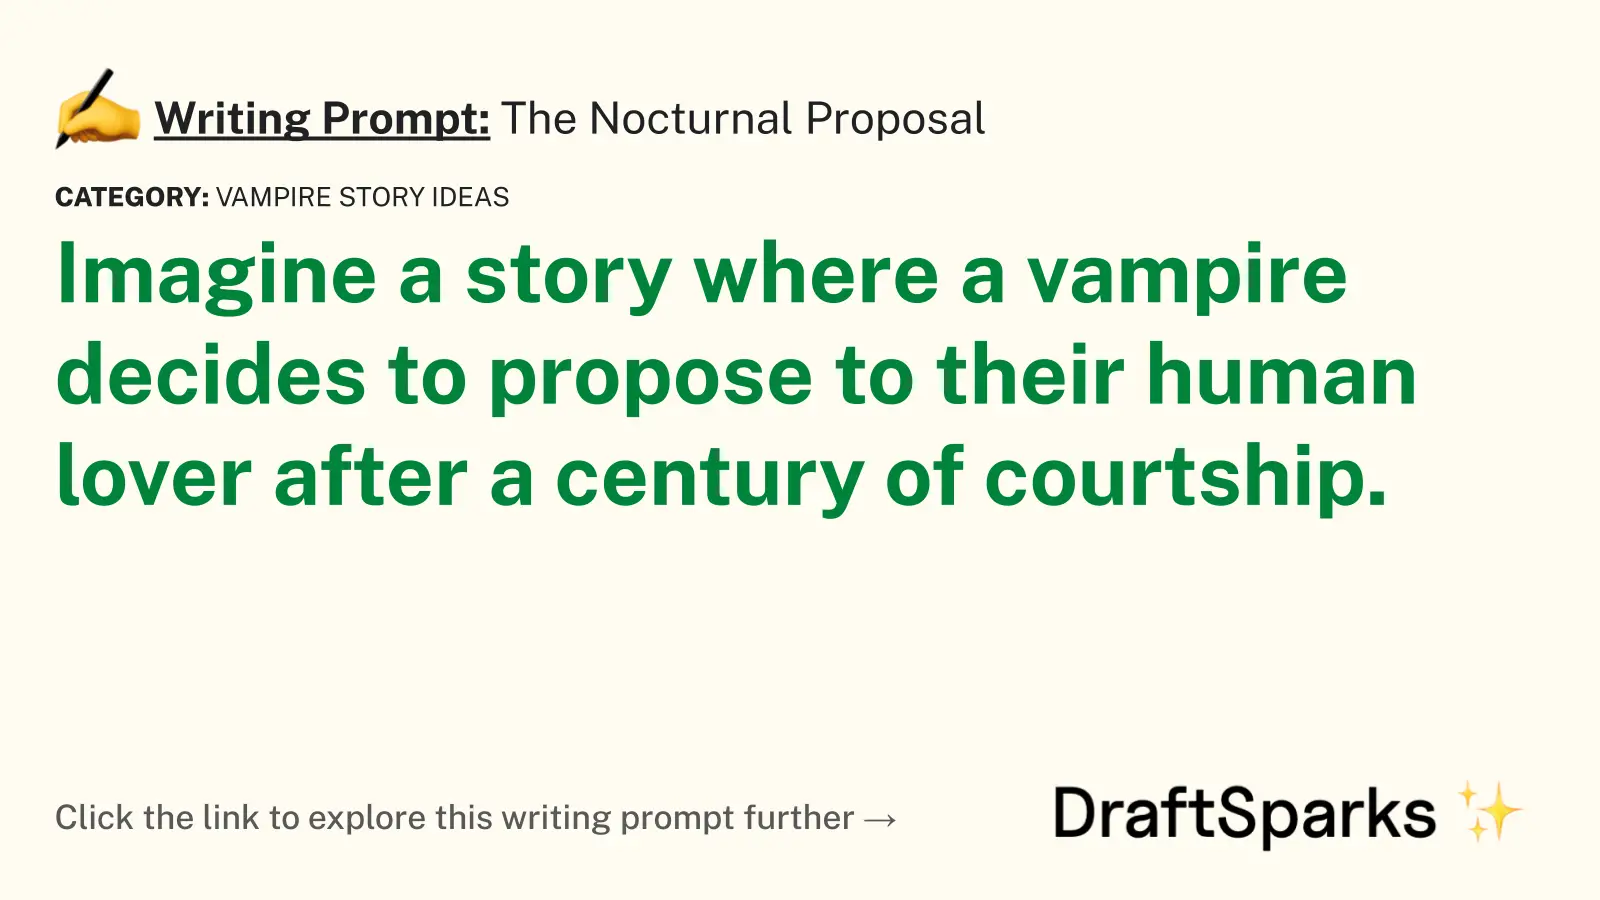 The Nocturnal Proposal